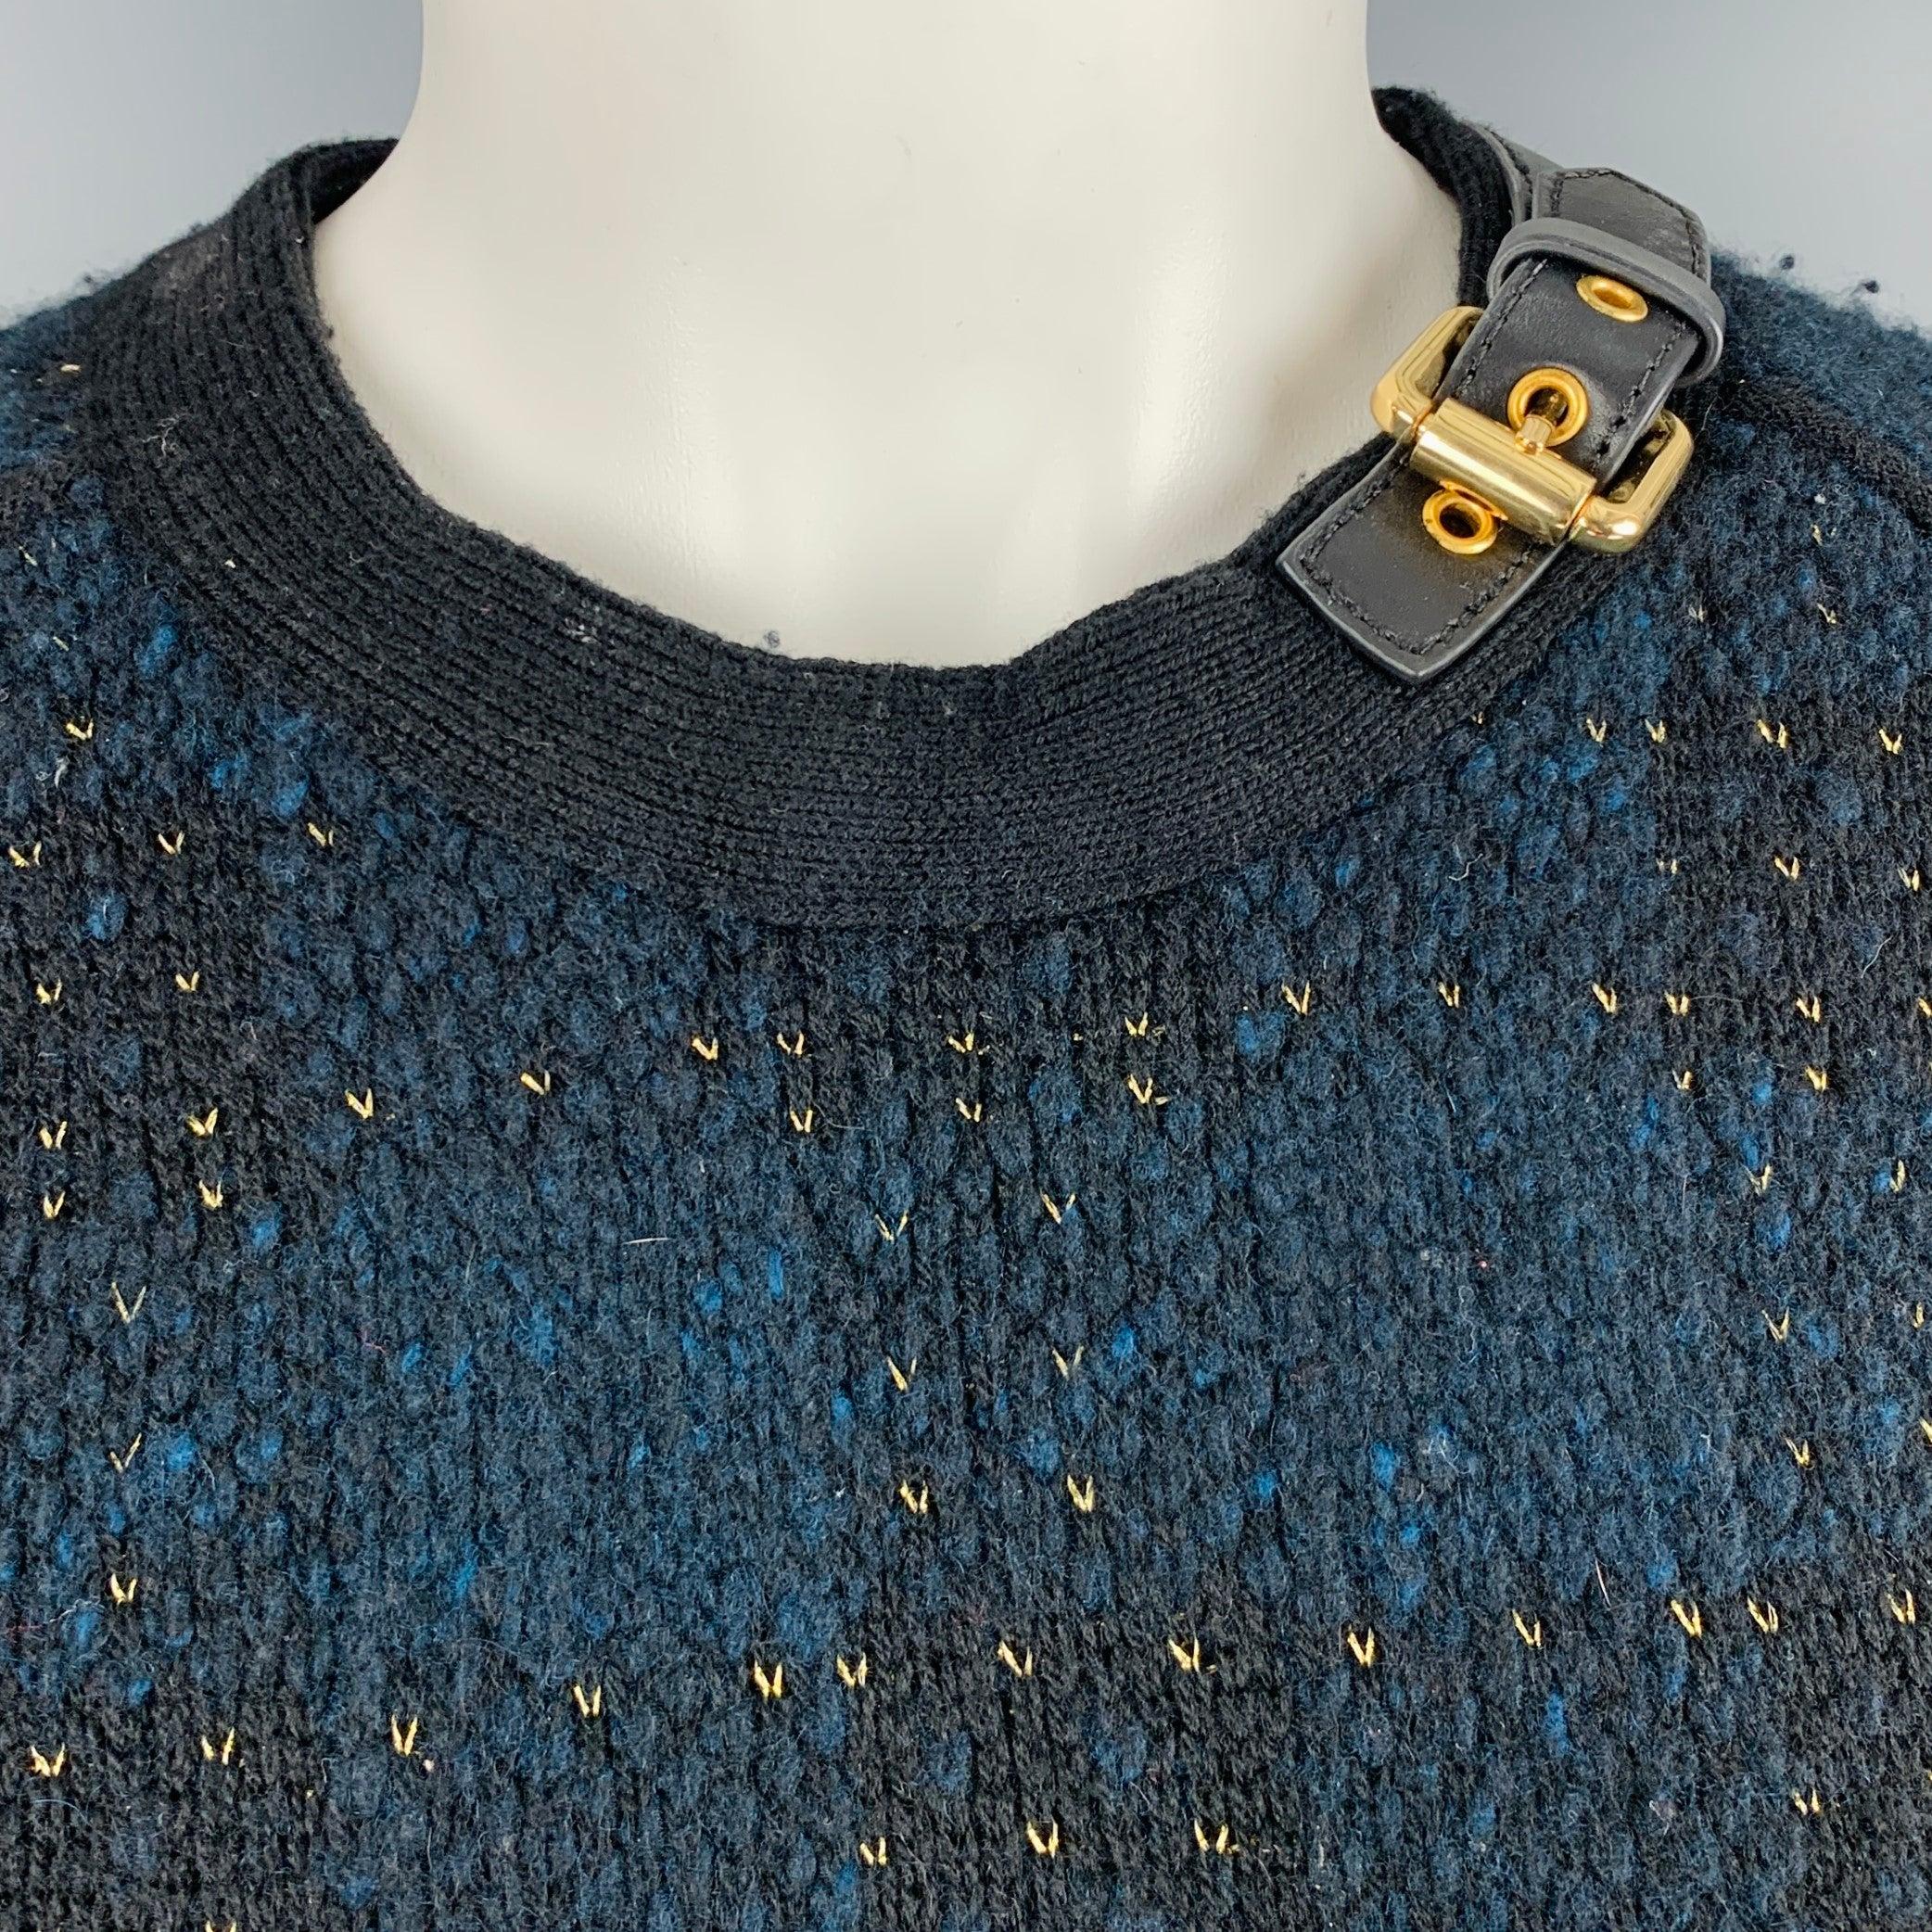 3.1 PHILLIP LIM sweater
in a
black wool blend knit featuring gold tone details throughout, matched in the gold tone buckle leather collar detail.Very Good Pre-Owned Condition. Moderate pilling, as is. 

Marked:   S 

Measurements: 
 
Shoulder: 17.5